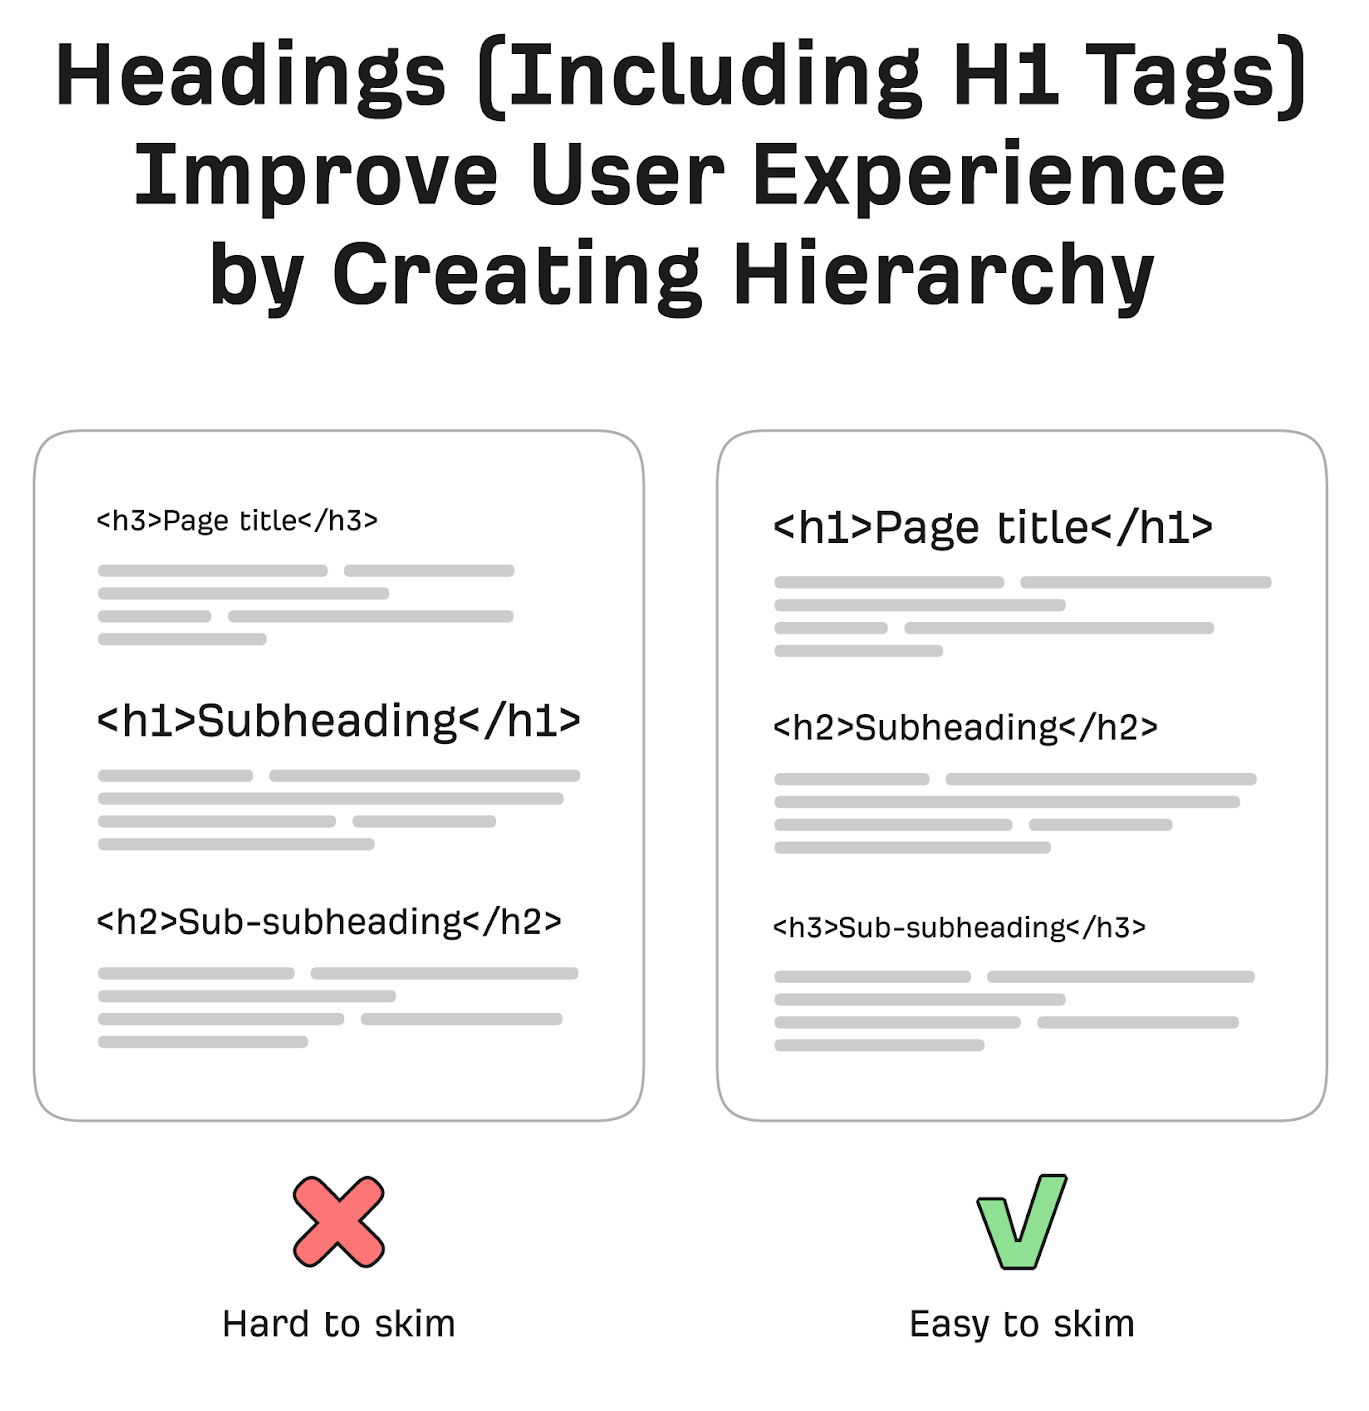 H1 and H2